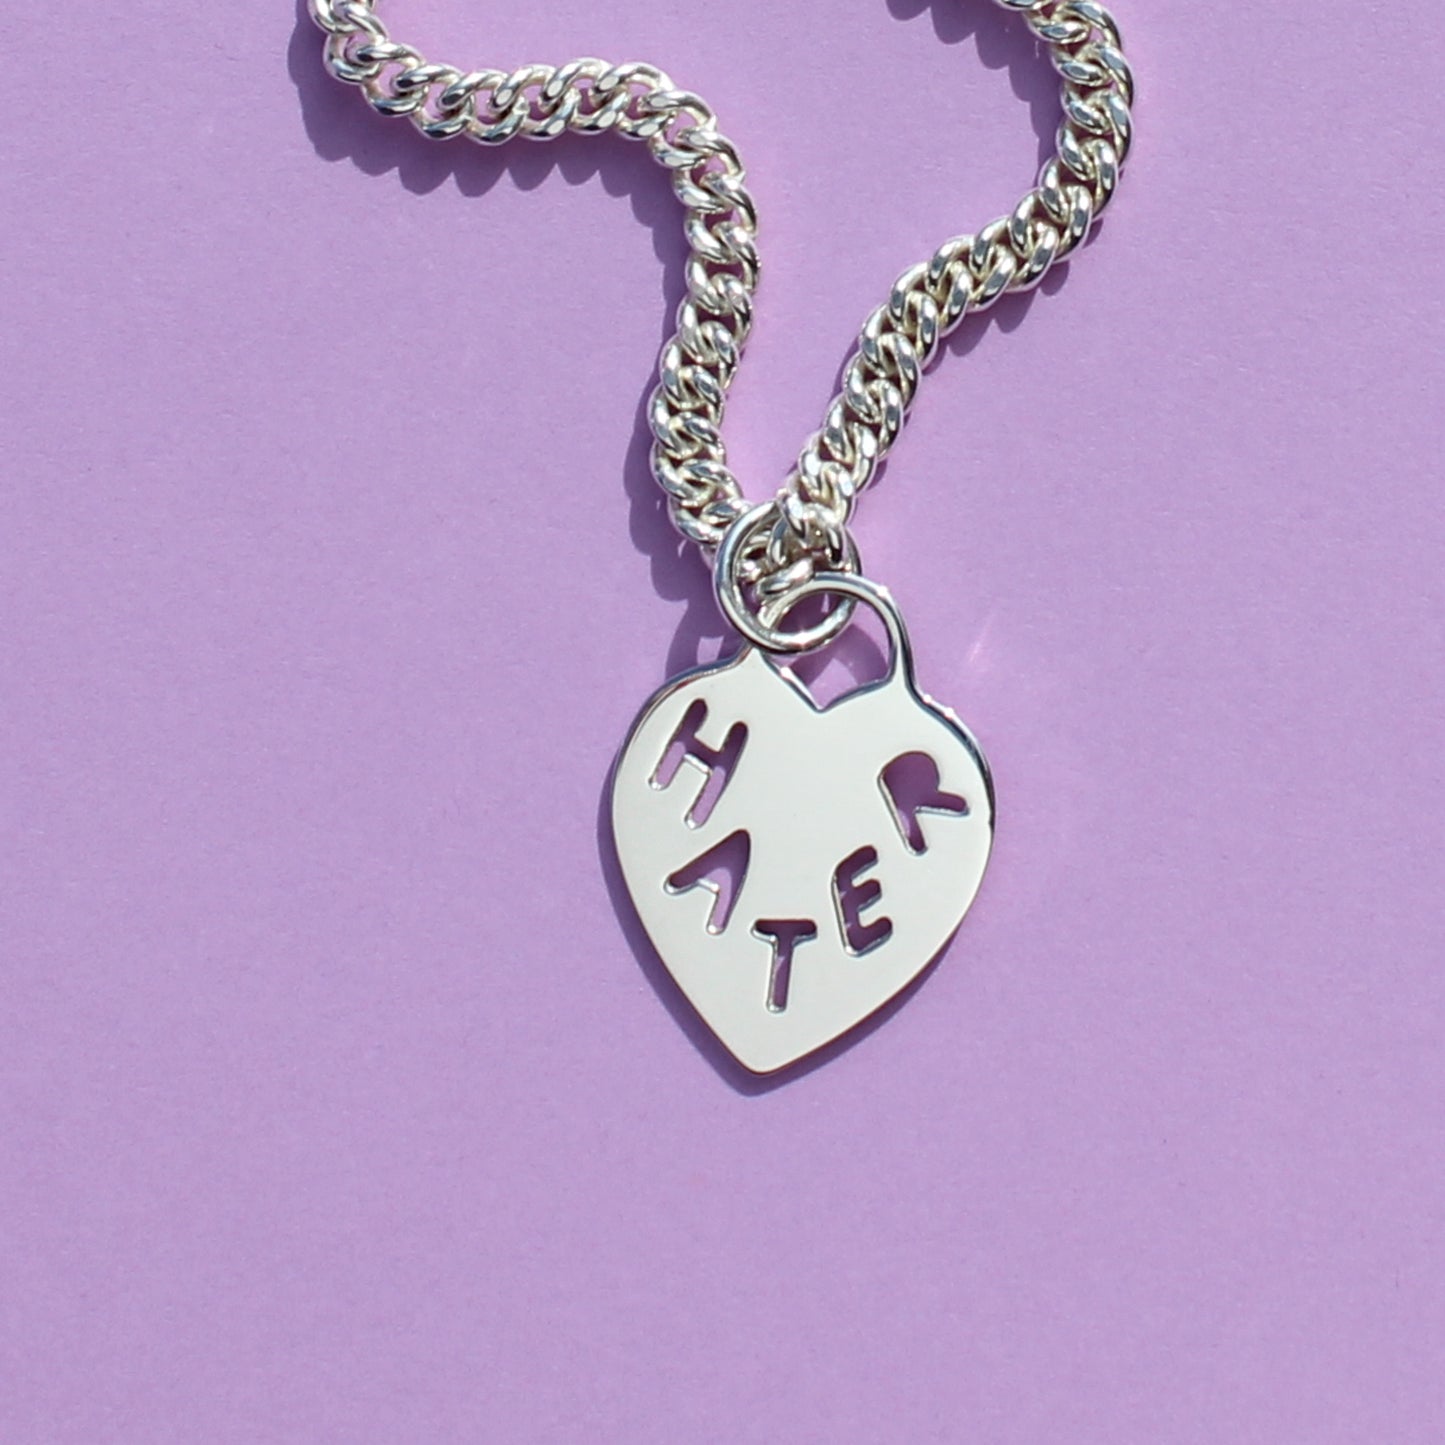 HATER heart tag necklace